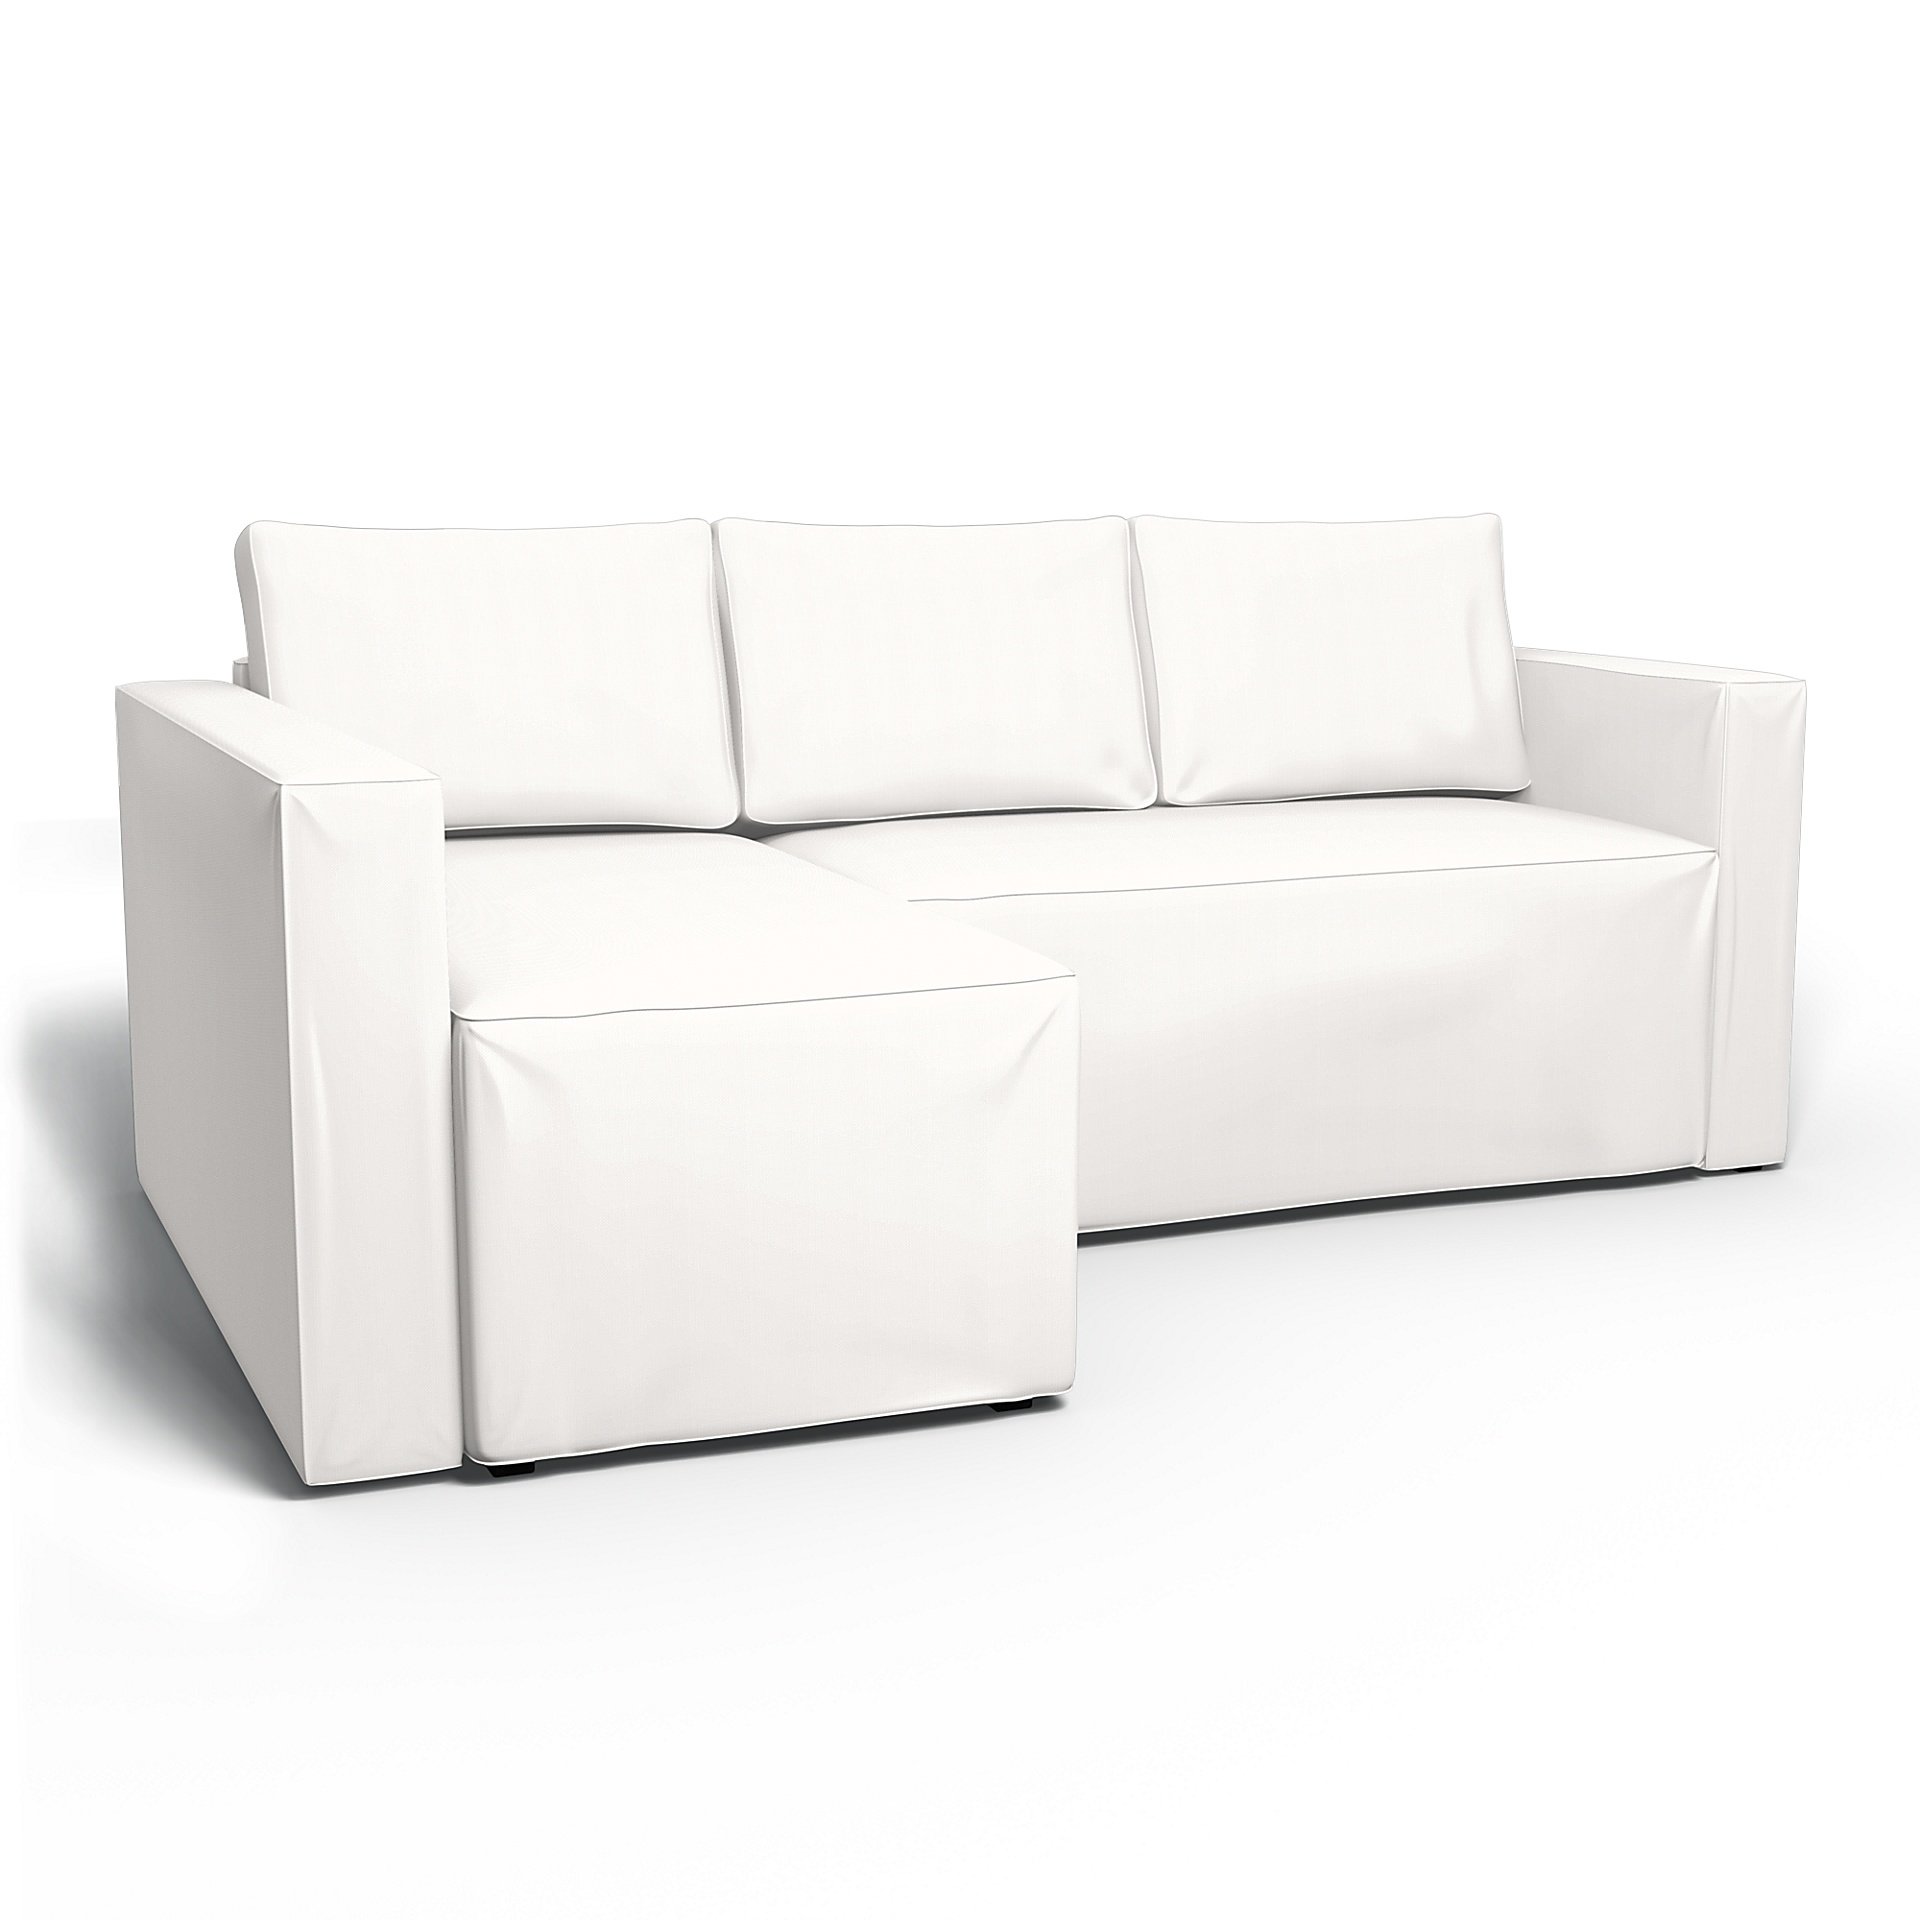 IKEA - Manstad Sofa Bed with Left Chaise Cover, Soft White, Linen - Bemz